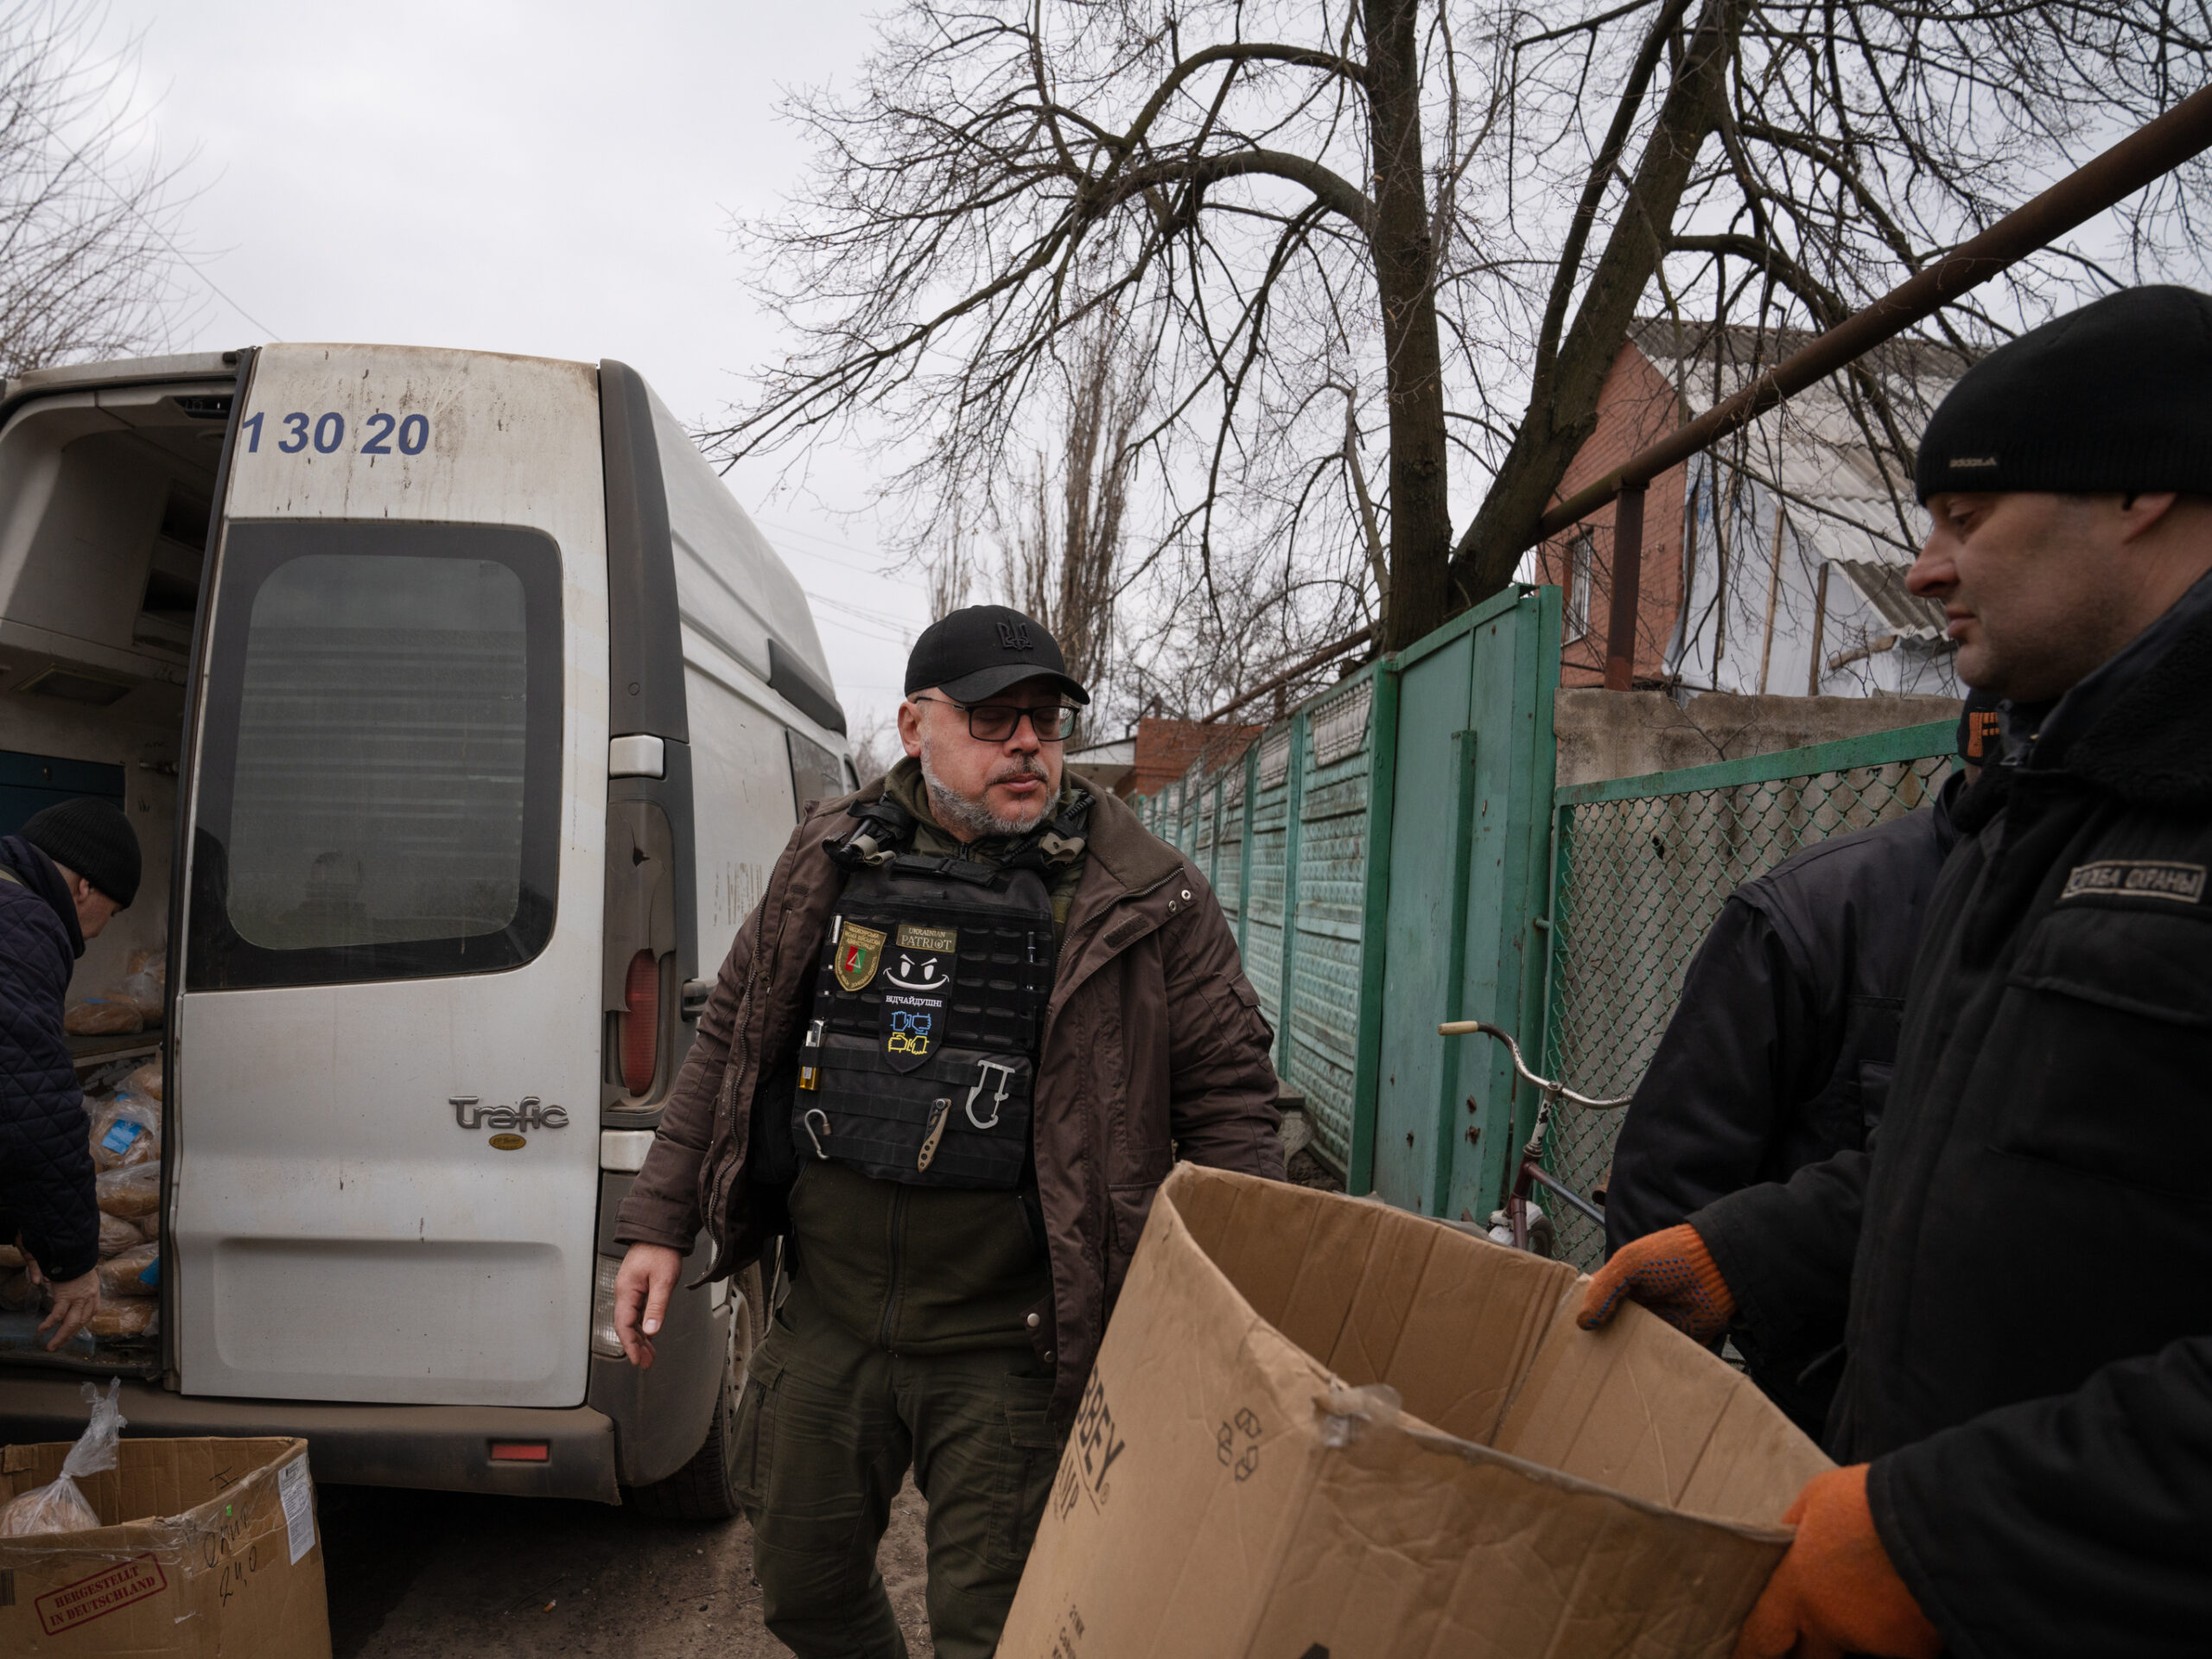 Serhii Chaus, the mayor of the eastern Ukrainian city of Chasiv Yar, arrives at a bread delivery location on the outskirts of town. Chaus goes daily into the embattled town to deliver supplies and meet residents who choose to stay there as Russian forces are approaching the area.